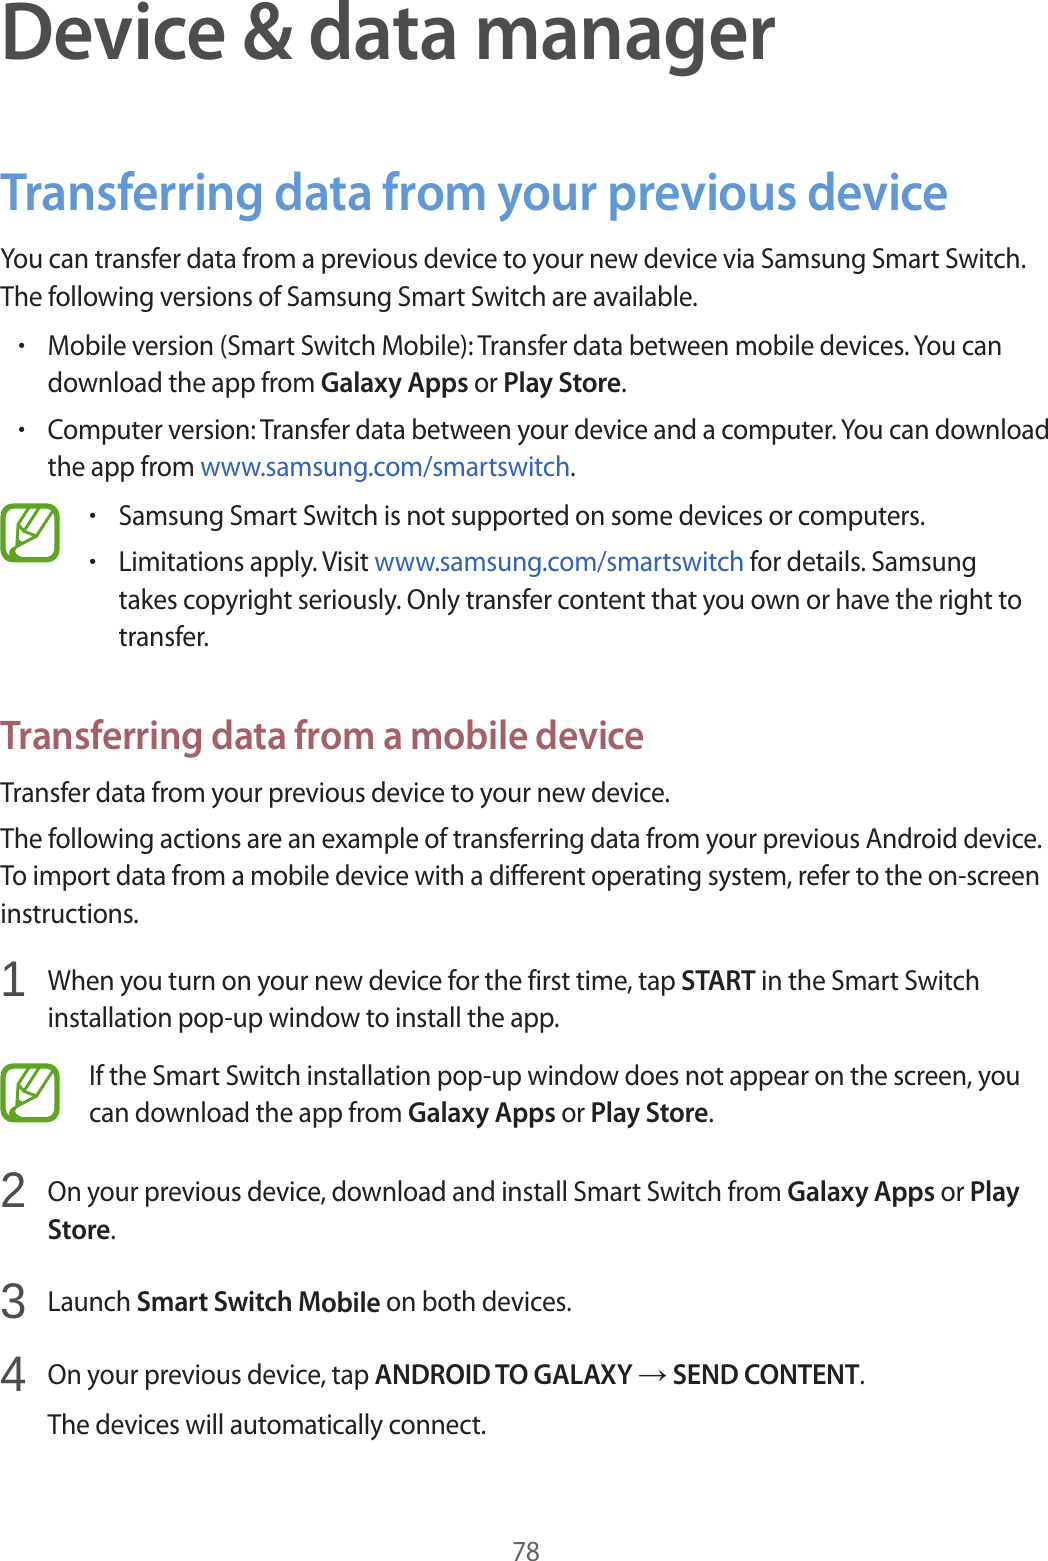 78Device &amp; data managerTransferring data from your previous deviceYou can transfer data from a previous device to your new device via Samsung Smart Switch. The following versions of Samsung Smart Switch are available.•Mobile version (Smart Switch Mobile): Transfer data between mobile devices. You candownload the app from Galaxy Apps or Play Store.•Computer version: Transfer data between your device and a computer. You can downloadthe app from www.samsung.com/smartswitch.•Samsung Smart Switch is not supported on some devices or computers.•Limitations apply. Visit www.samsung.com/smartswitch for details. Samsungtakes copyright seriously. Only transfer content that you own or have the right totransfer.Transferring data from a mobile deviceTransfer data from your previous device to your new device.The following actions are an example of transferring data from your previous Android device. To import data from a mobile device with a different operating system, refer to the on-screen instructions.1  When you turn on your new device for the first time, tap START in the Smart Switchinstallation pop-up window to install the app.If the Smart Switch installation pop-up window does not appear on the screen, you can download the app from Galaxy Apps or Play Store.2  On your previous device, download and install Smart Switch from Galaxy Apps or PlayStore.3  Launch Smart Switch Mobile on both devices.4  On your previous device, tap ANDROID TO GALAXY → SEND CONTENT.The devices will automatically connect.